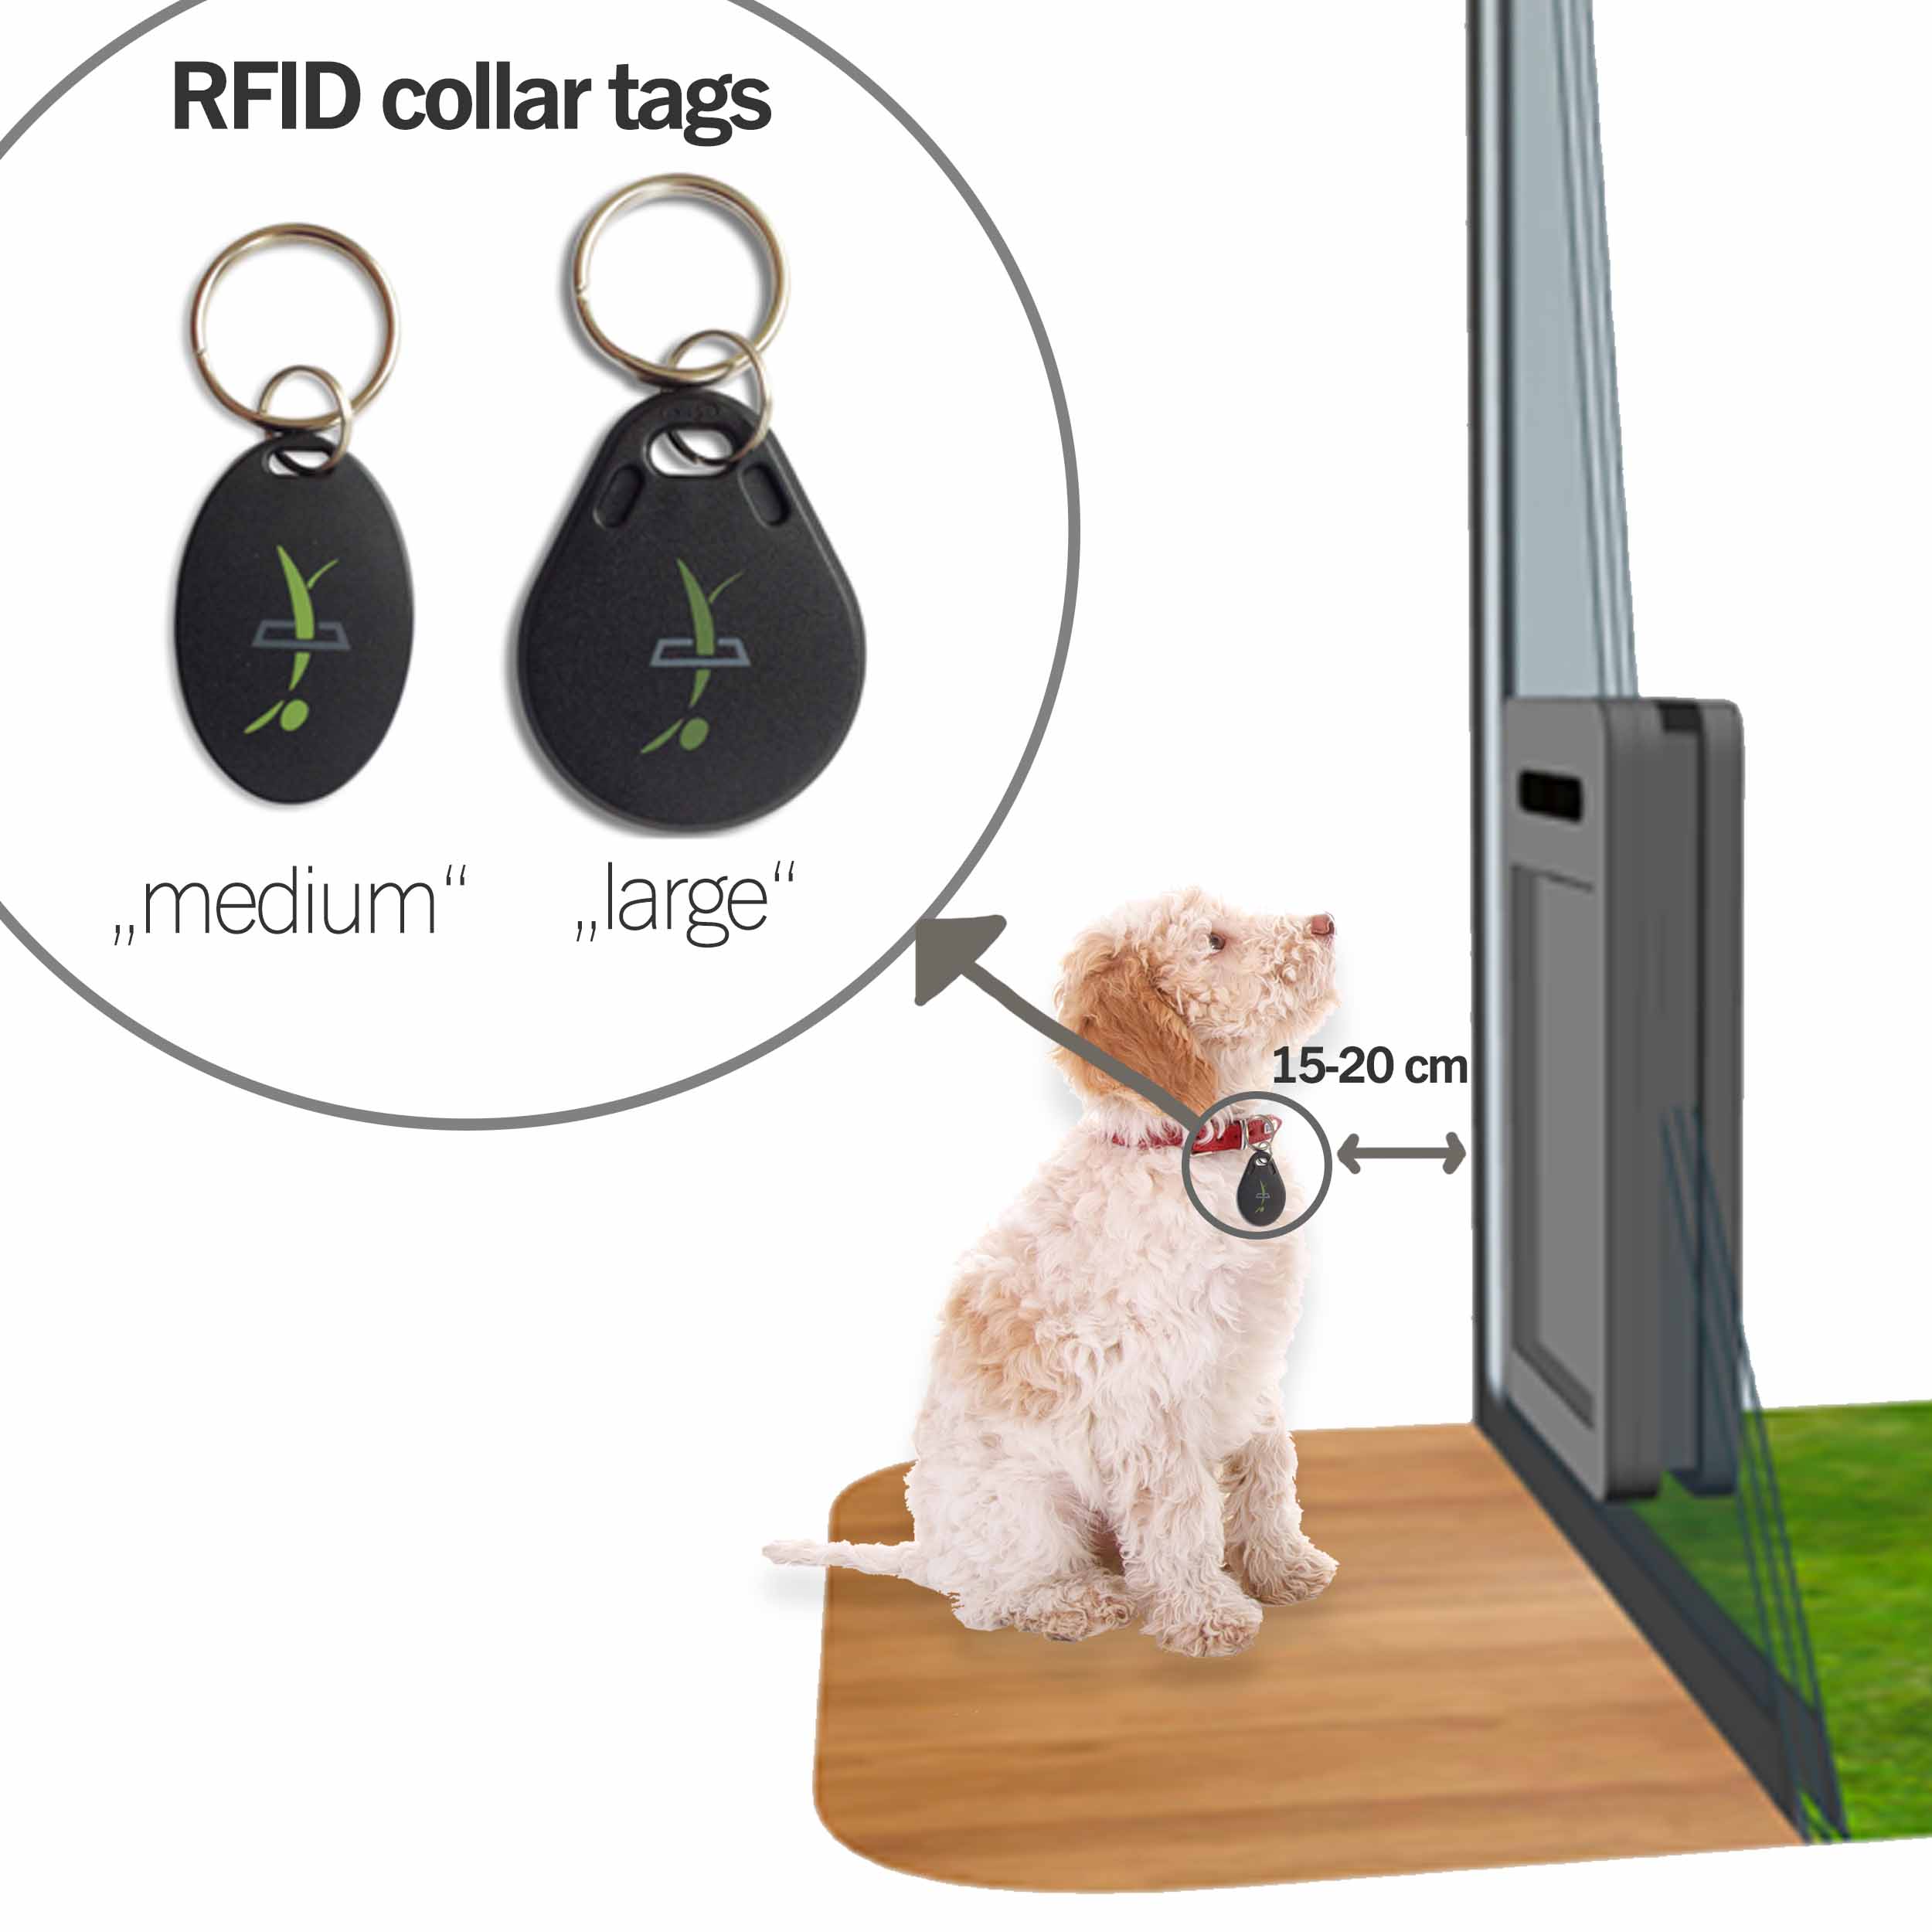 RFID chips – function and differences between collar tags and implanted microchips